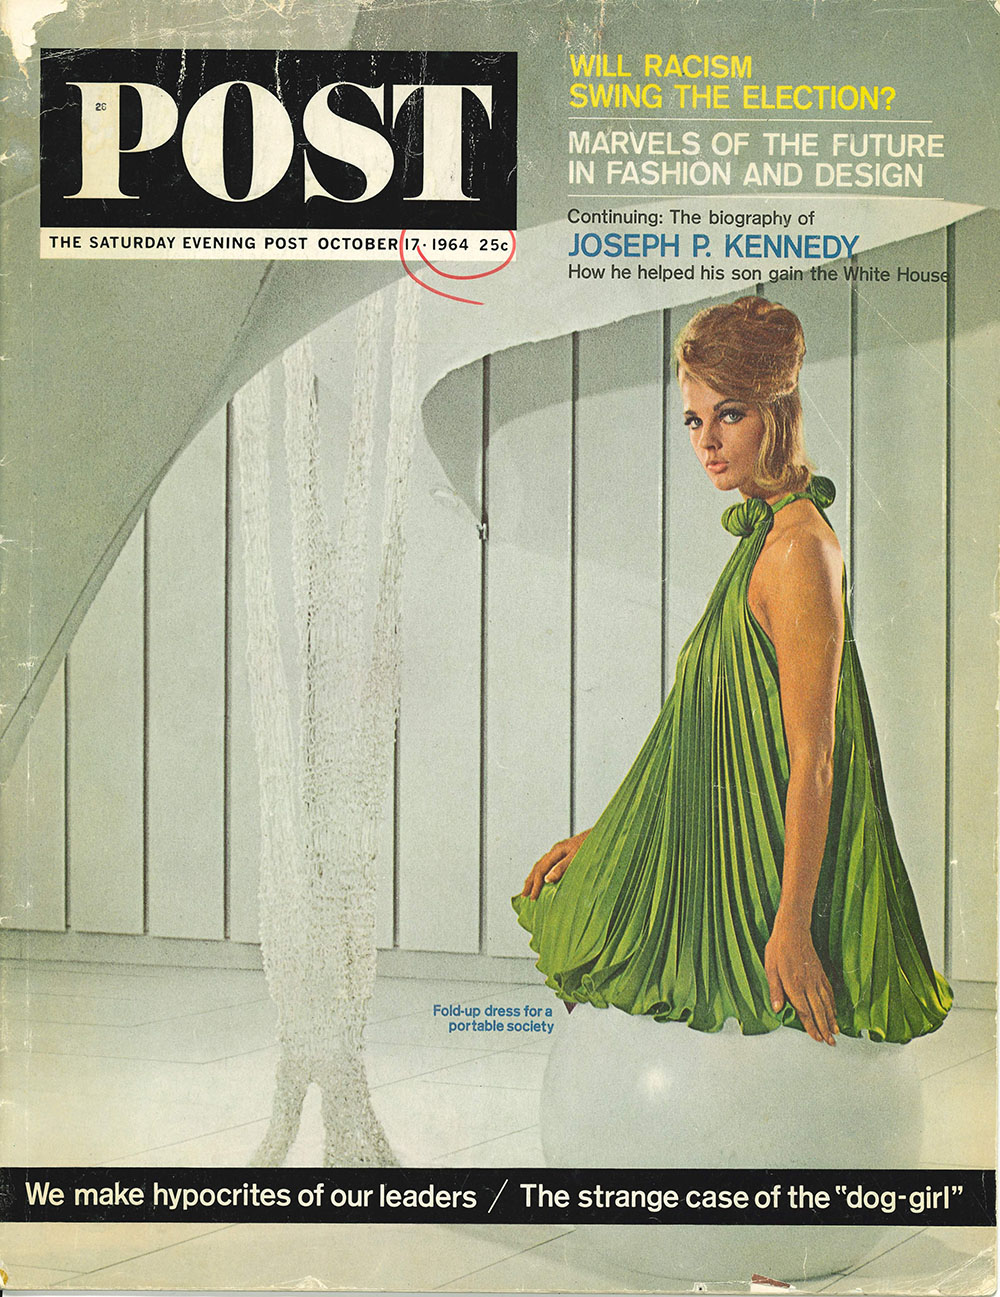 The Saturday Evening Post, October 17, 1964, cover